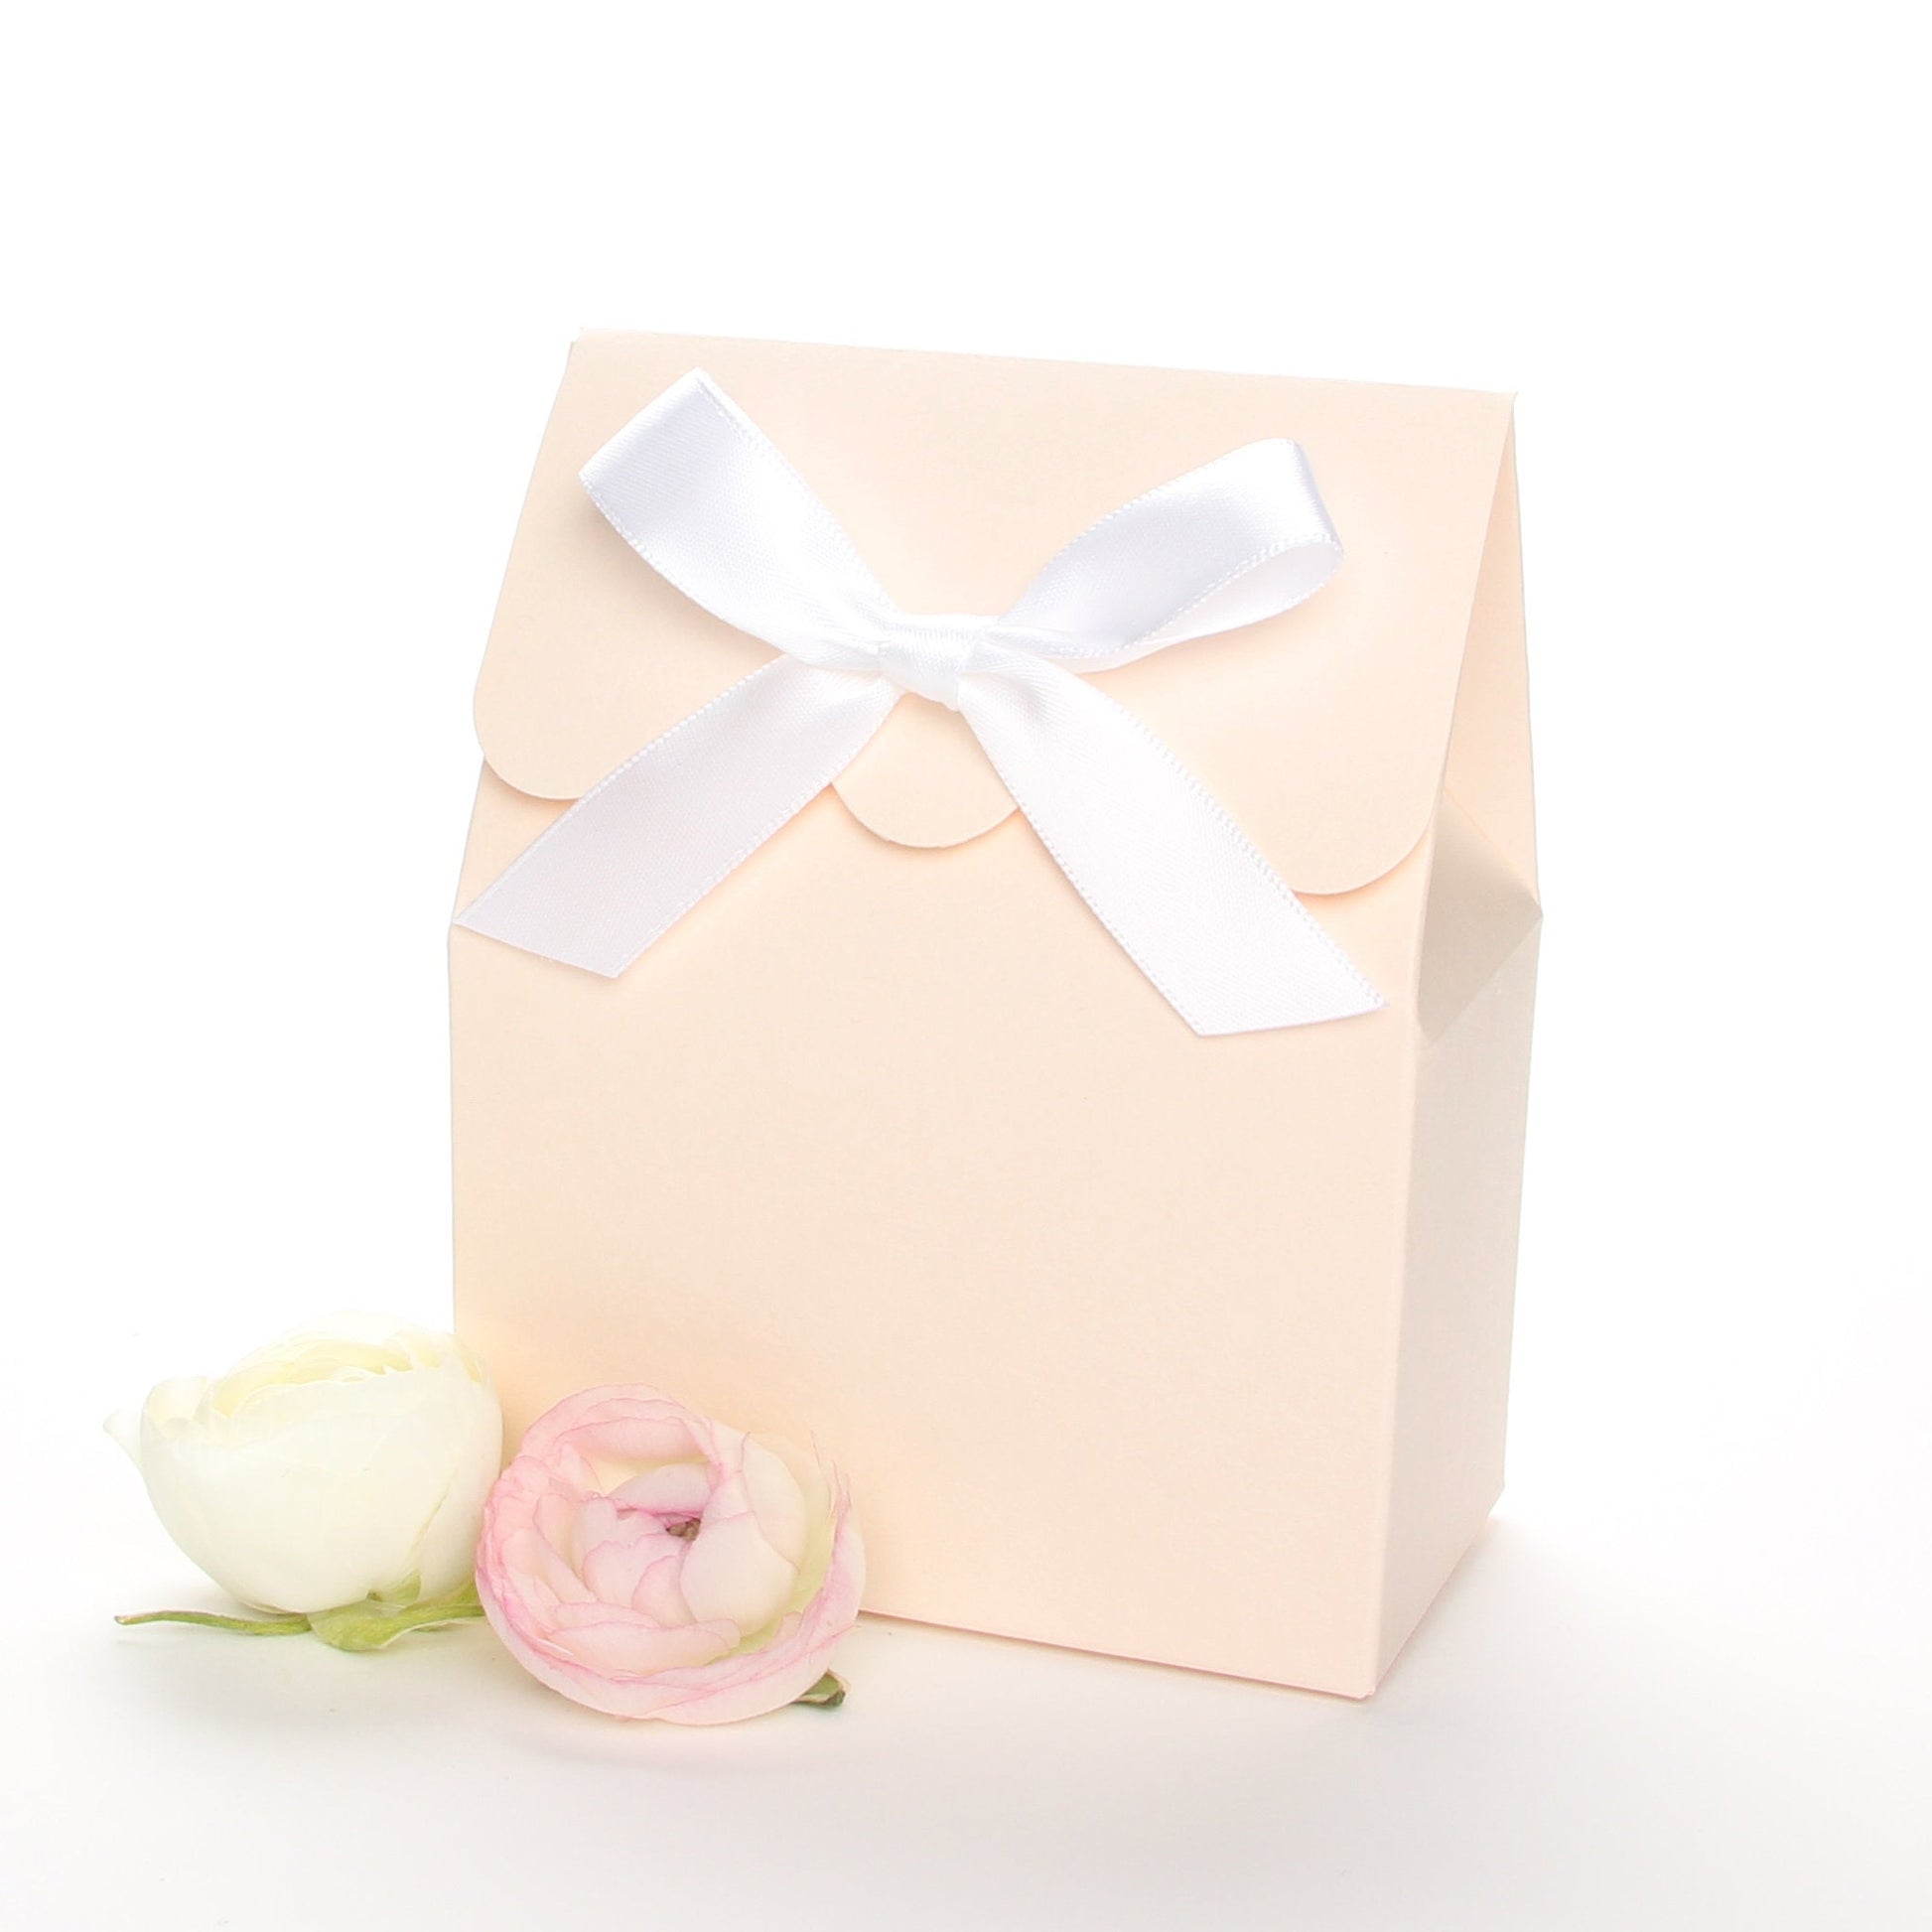 Lux Party’s blush favor box with a scalloped edge and a white bow next to pink and white ranunculus flowers.